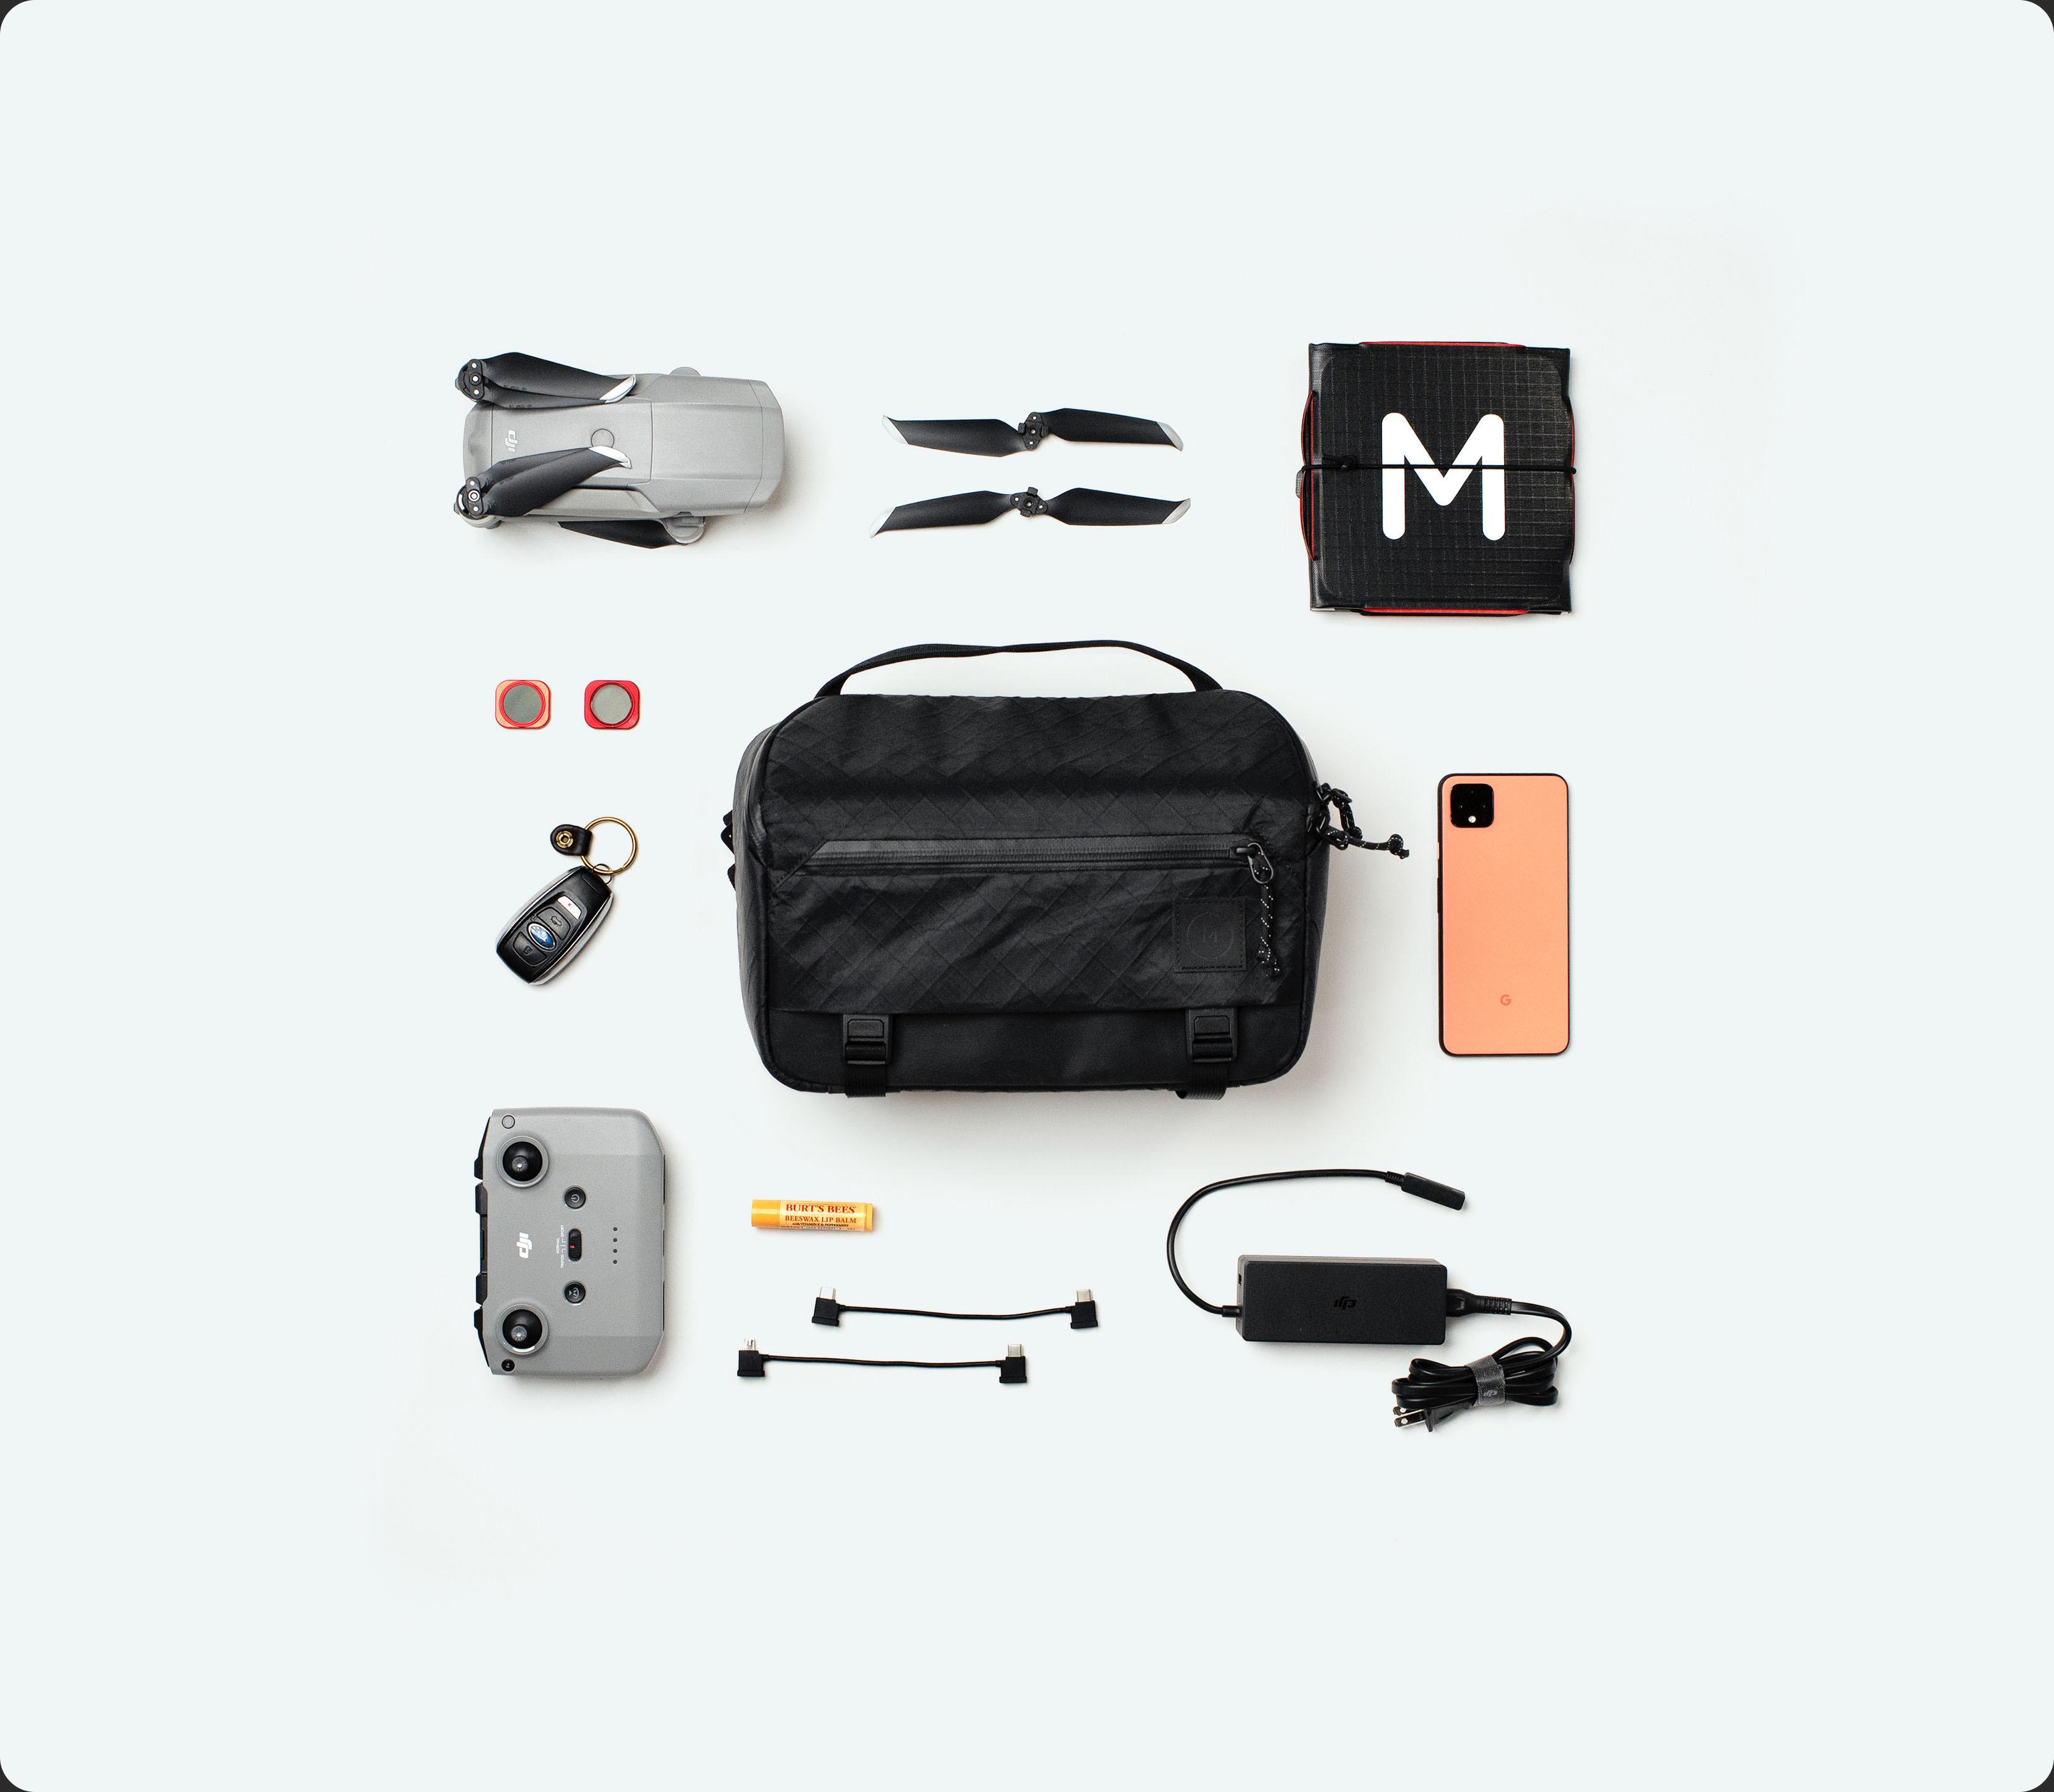 Moment 6 L sling flatlay drone 02